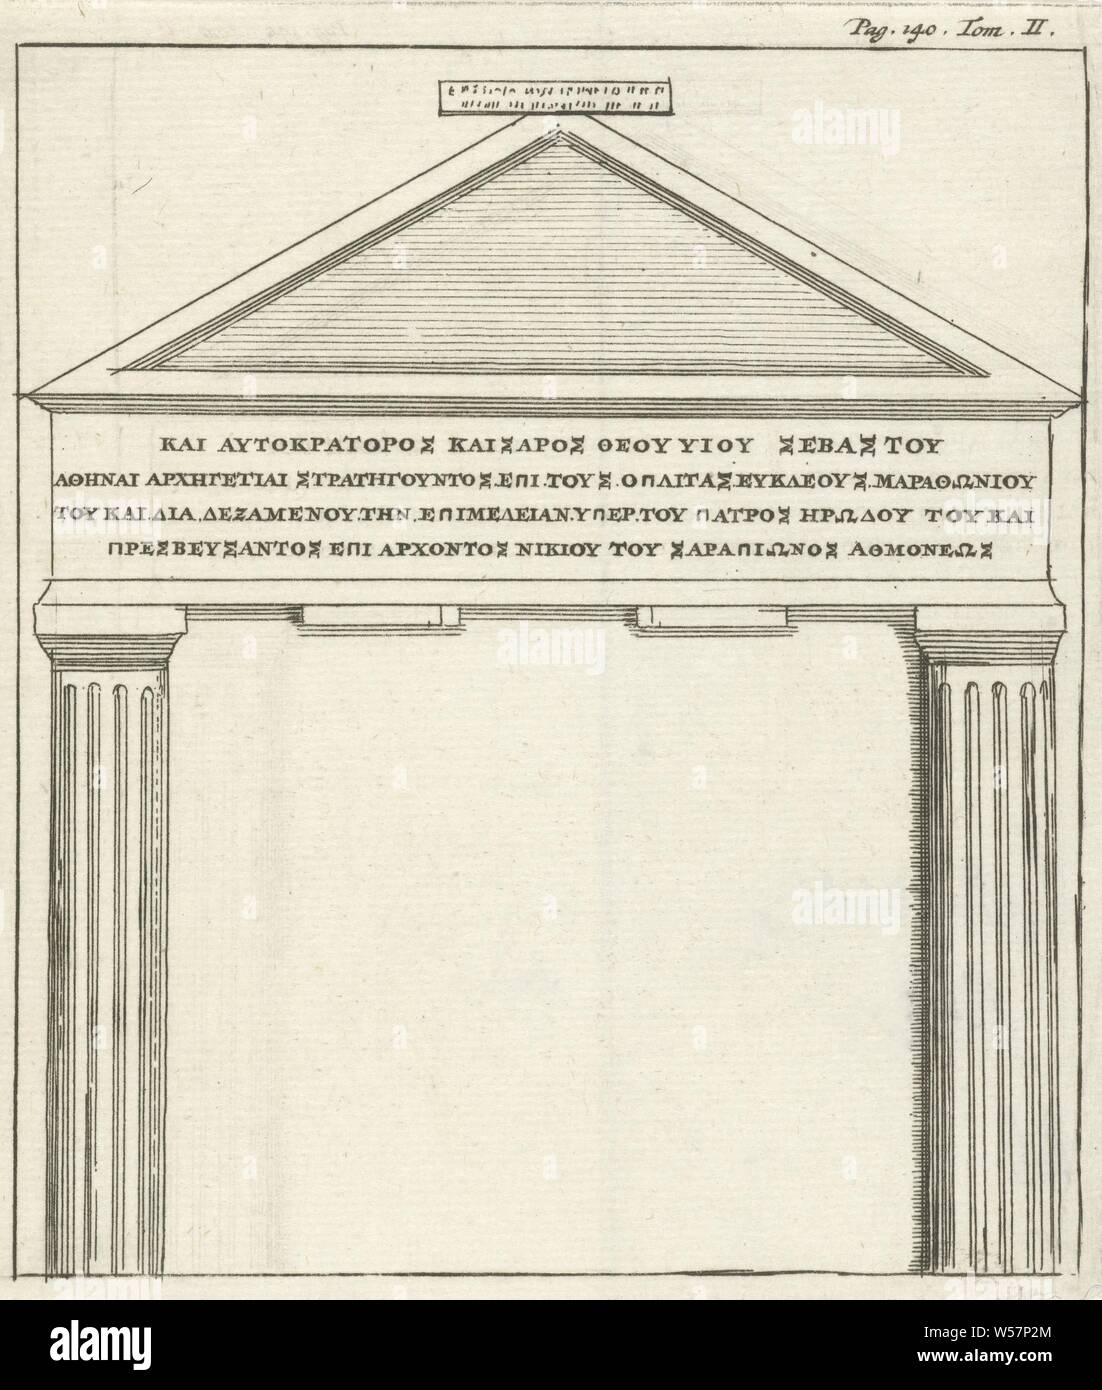 Roman gate in Athens, Print upper right: Pag. 140. Tom. II, architecture (Roman art), parts of church exterior and annexes: porch, Athens, Jan Luyken, Amsterdam, 1679, paper, etching, h 125 mm × w 107 mm Stock Photo